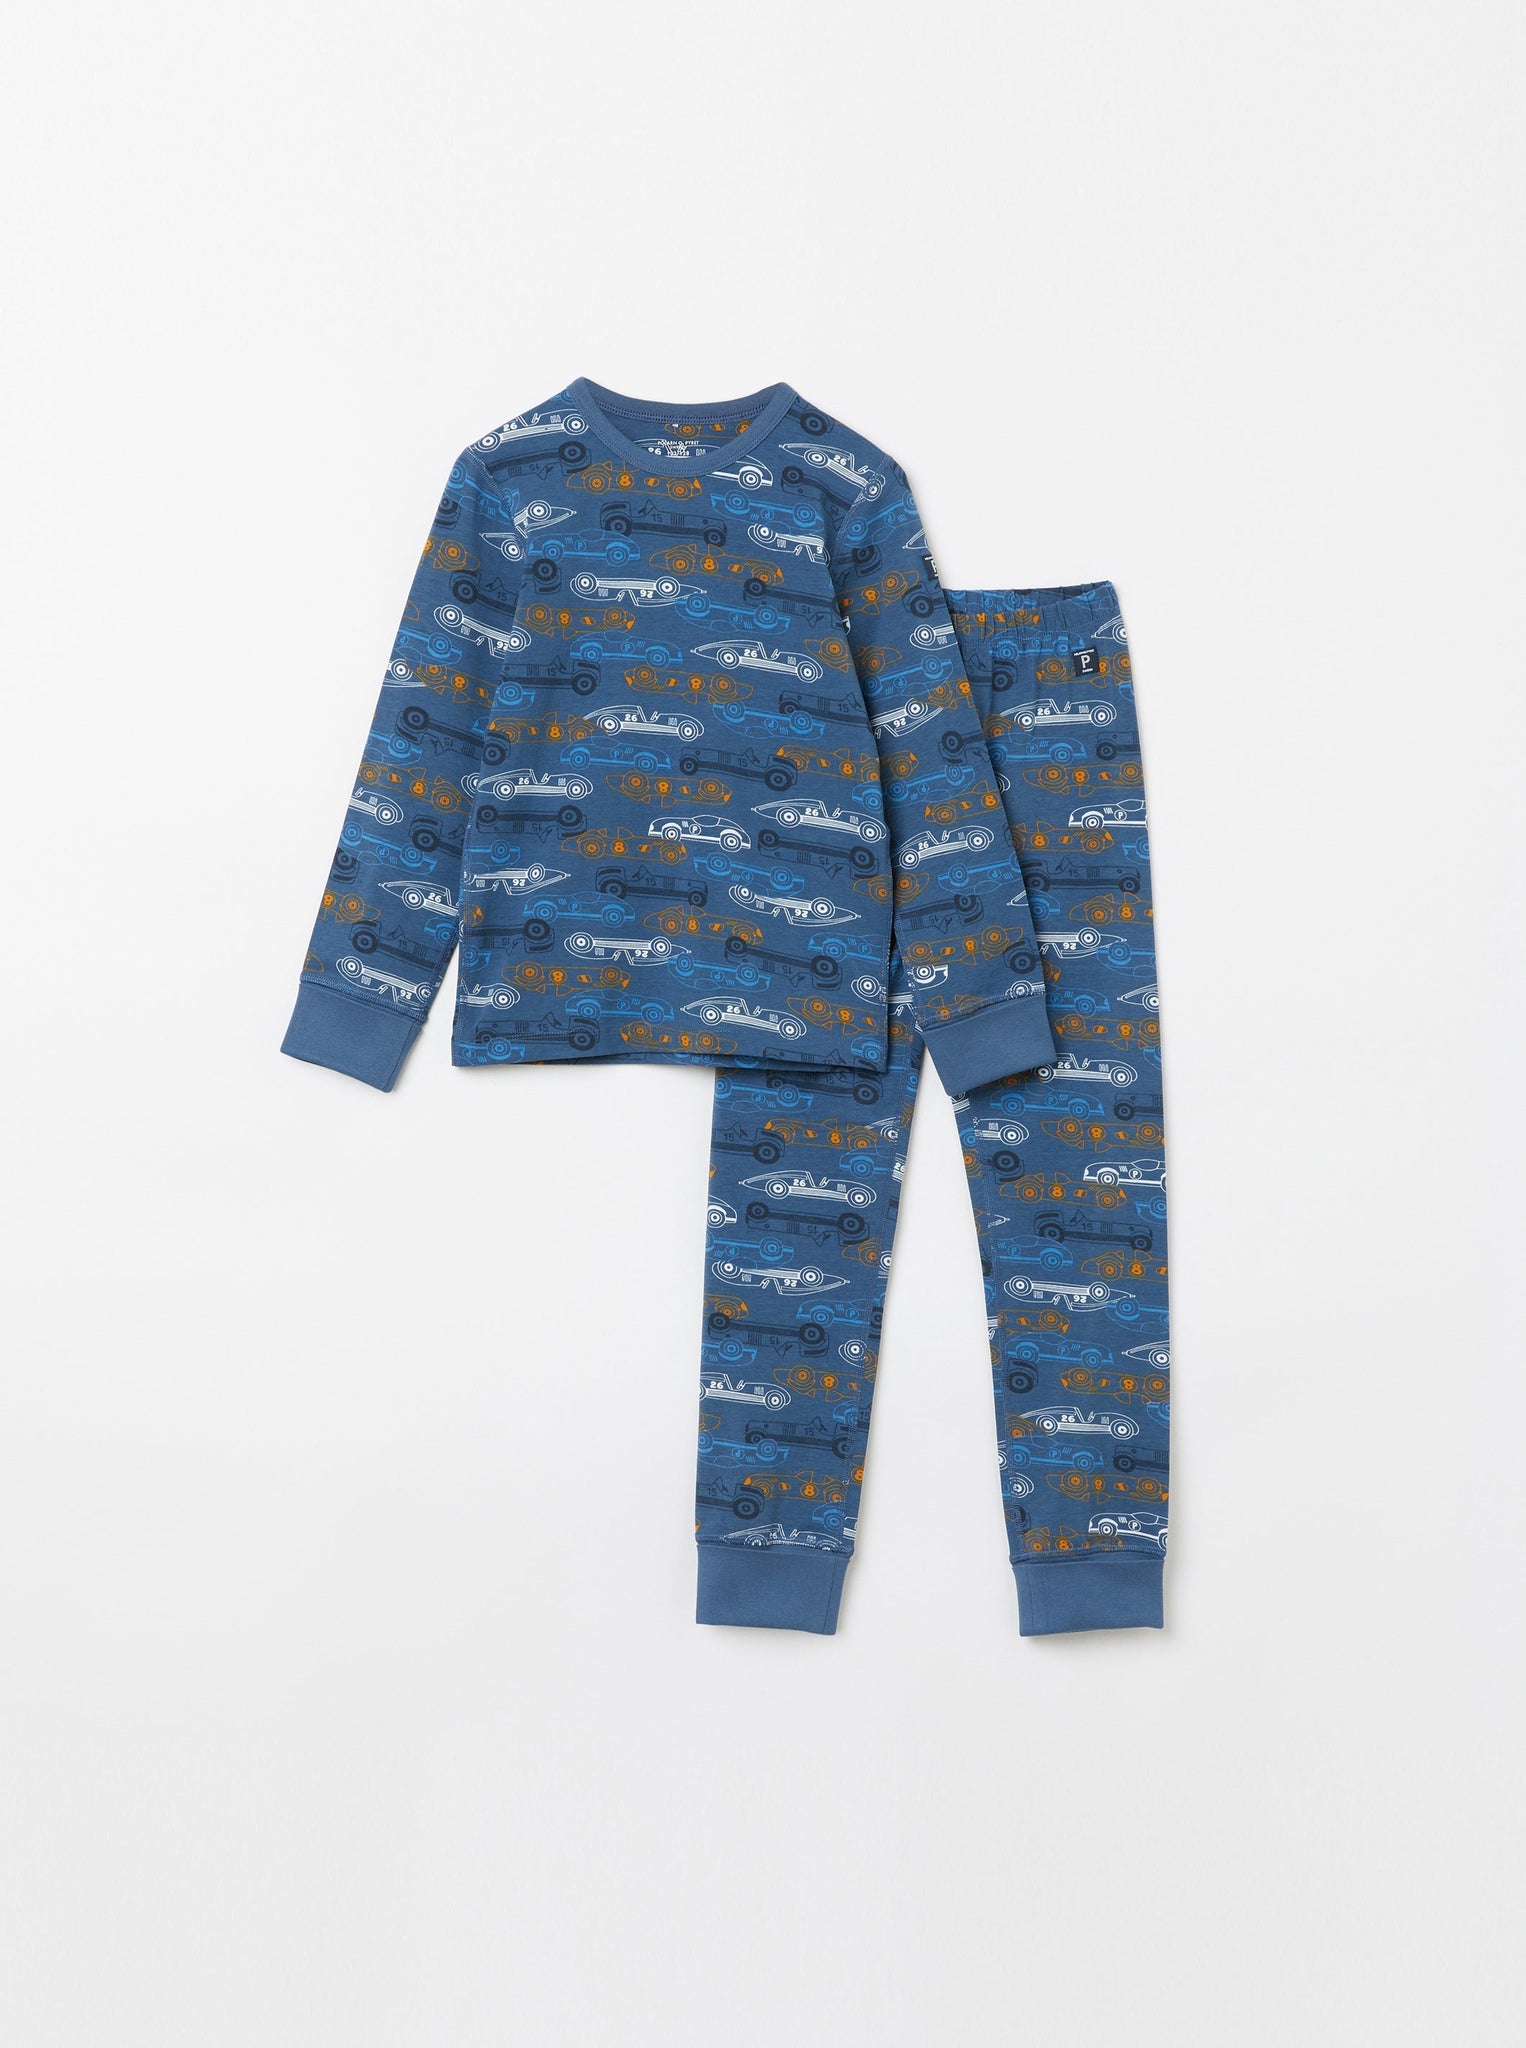 Racing Car Blue Kids Pyjamas from the Polarn O. Pyret Kidswear collection. The best ethical kids clothes